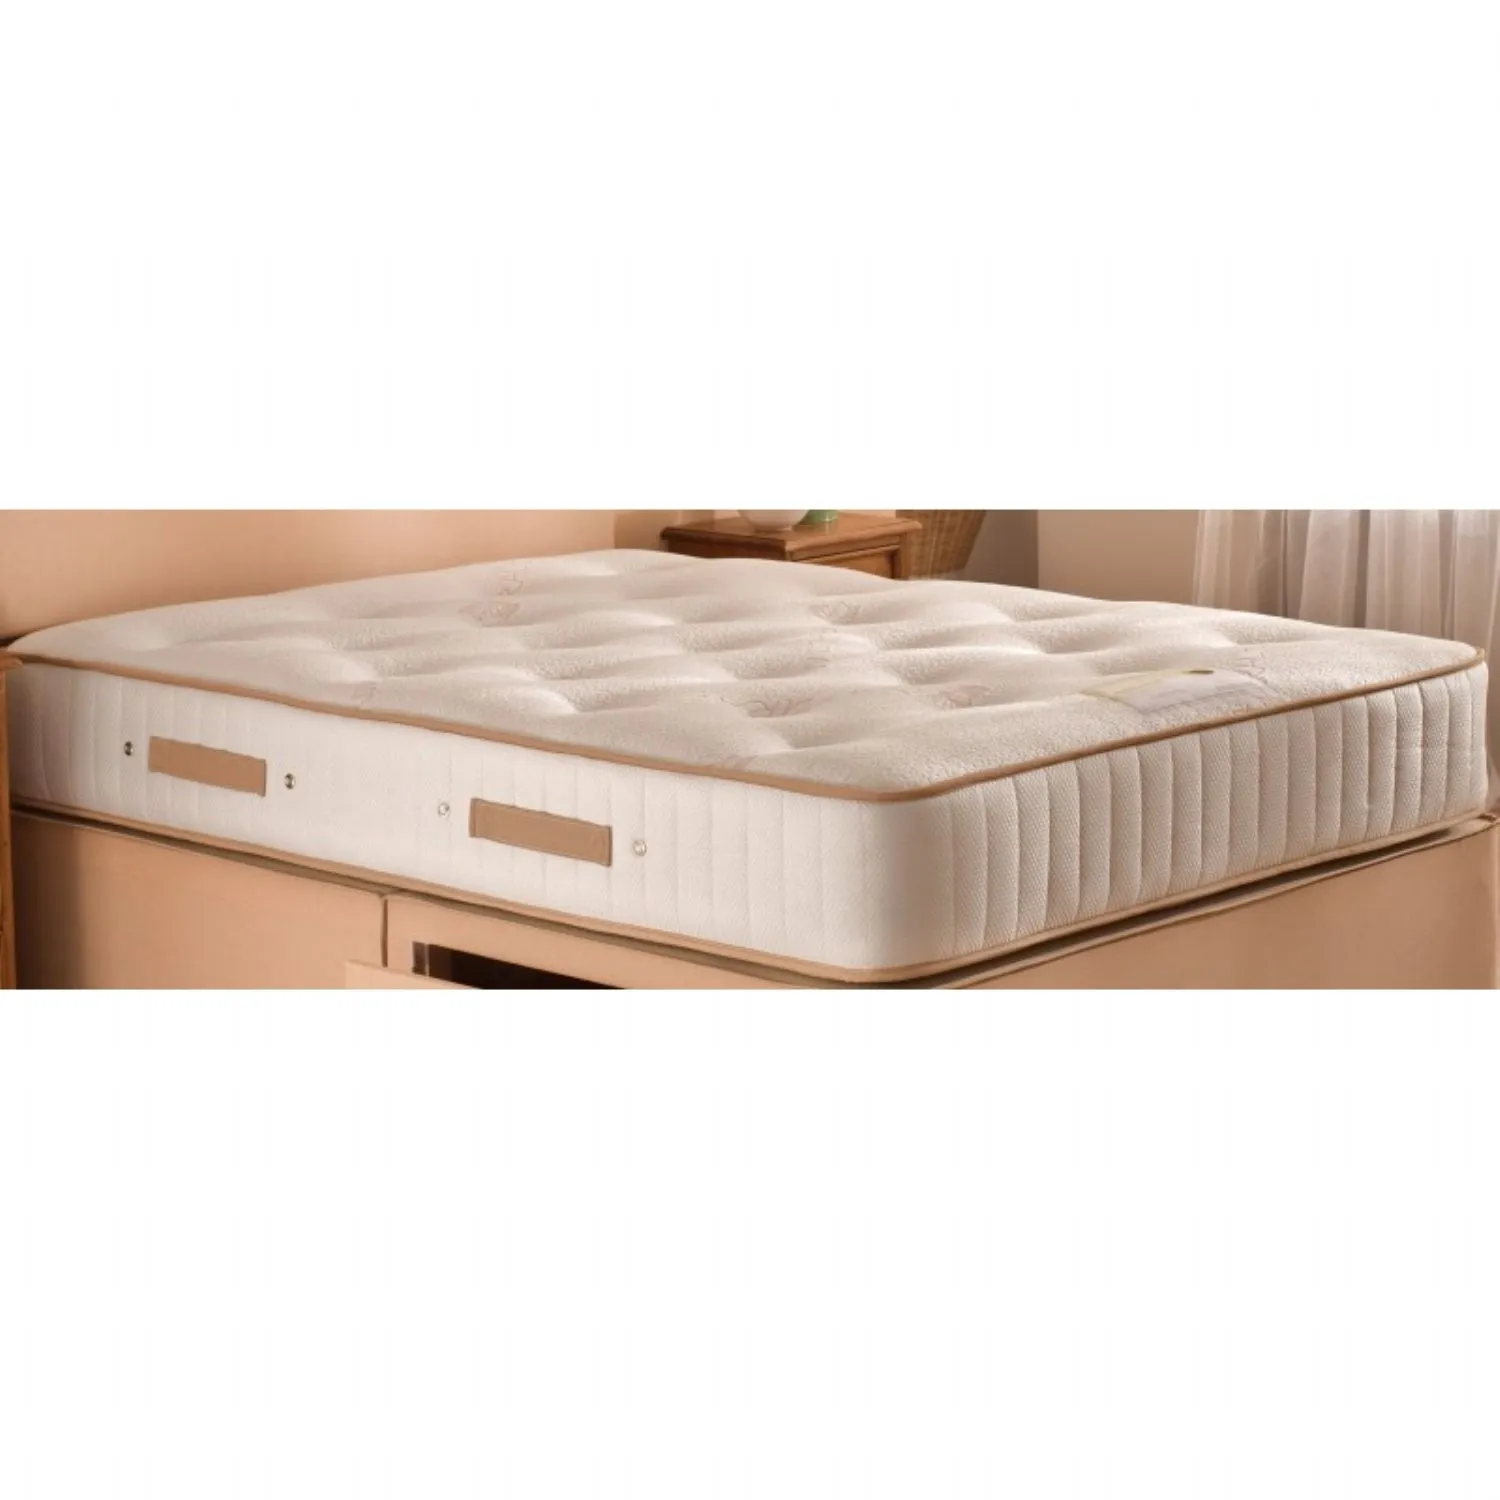 Luxury Canberra MB212 Spring Mattresses